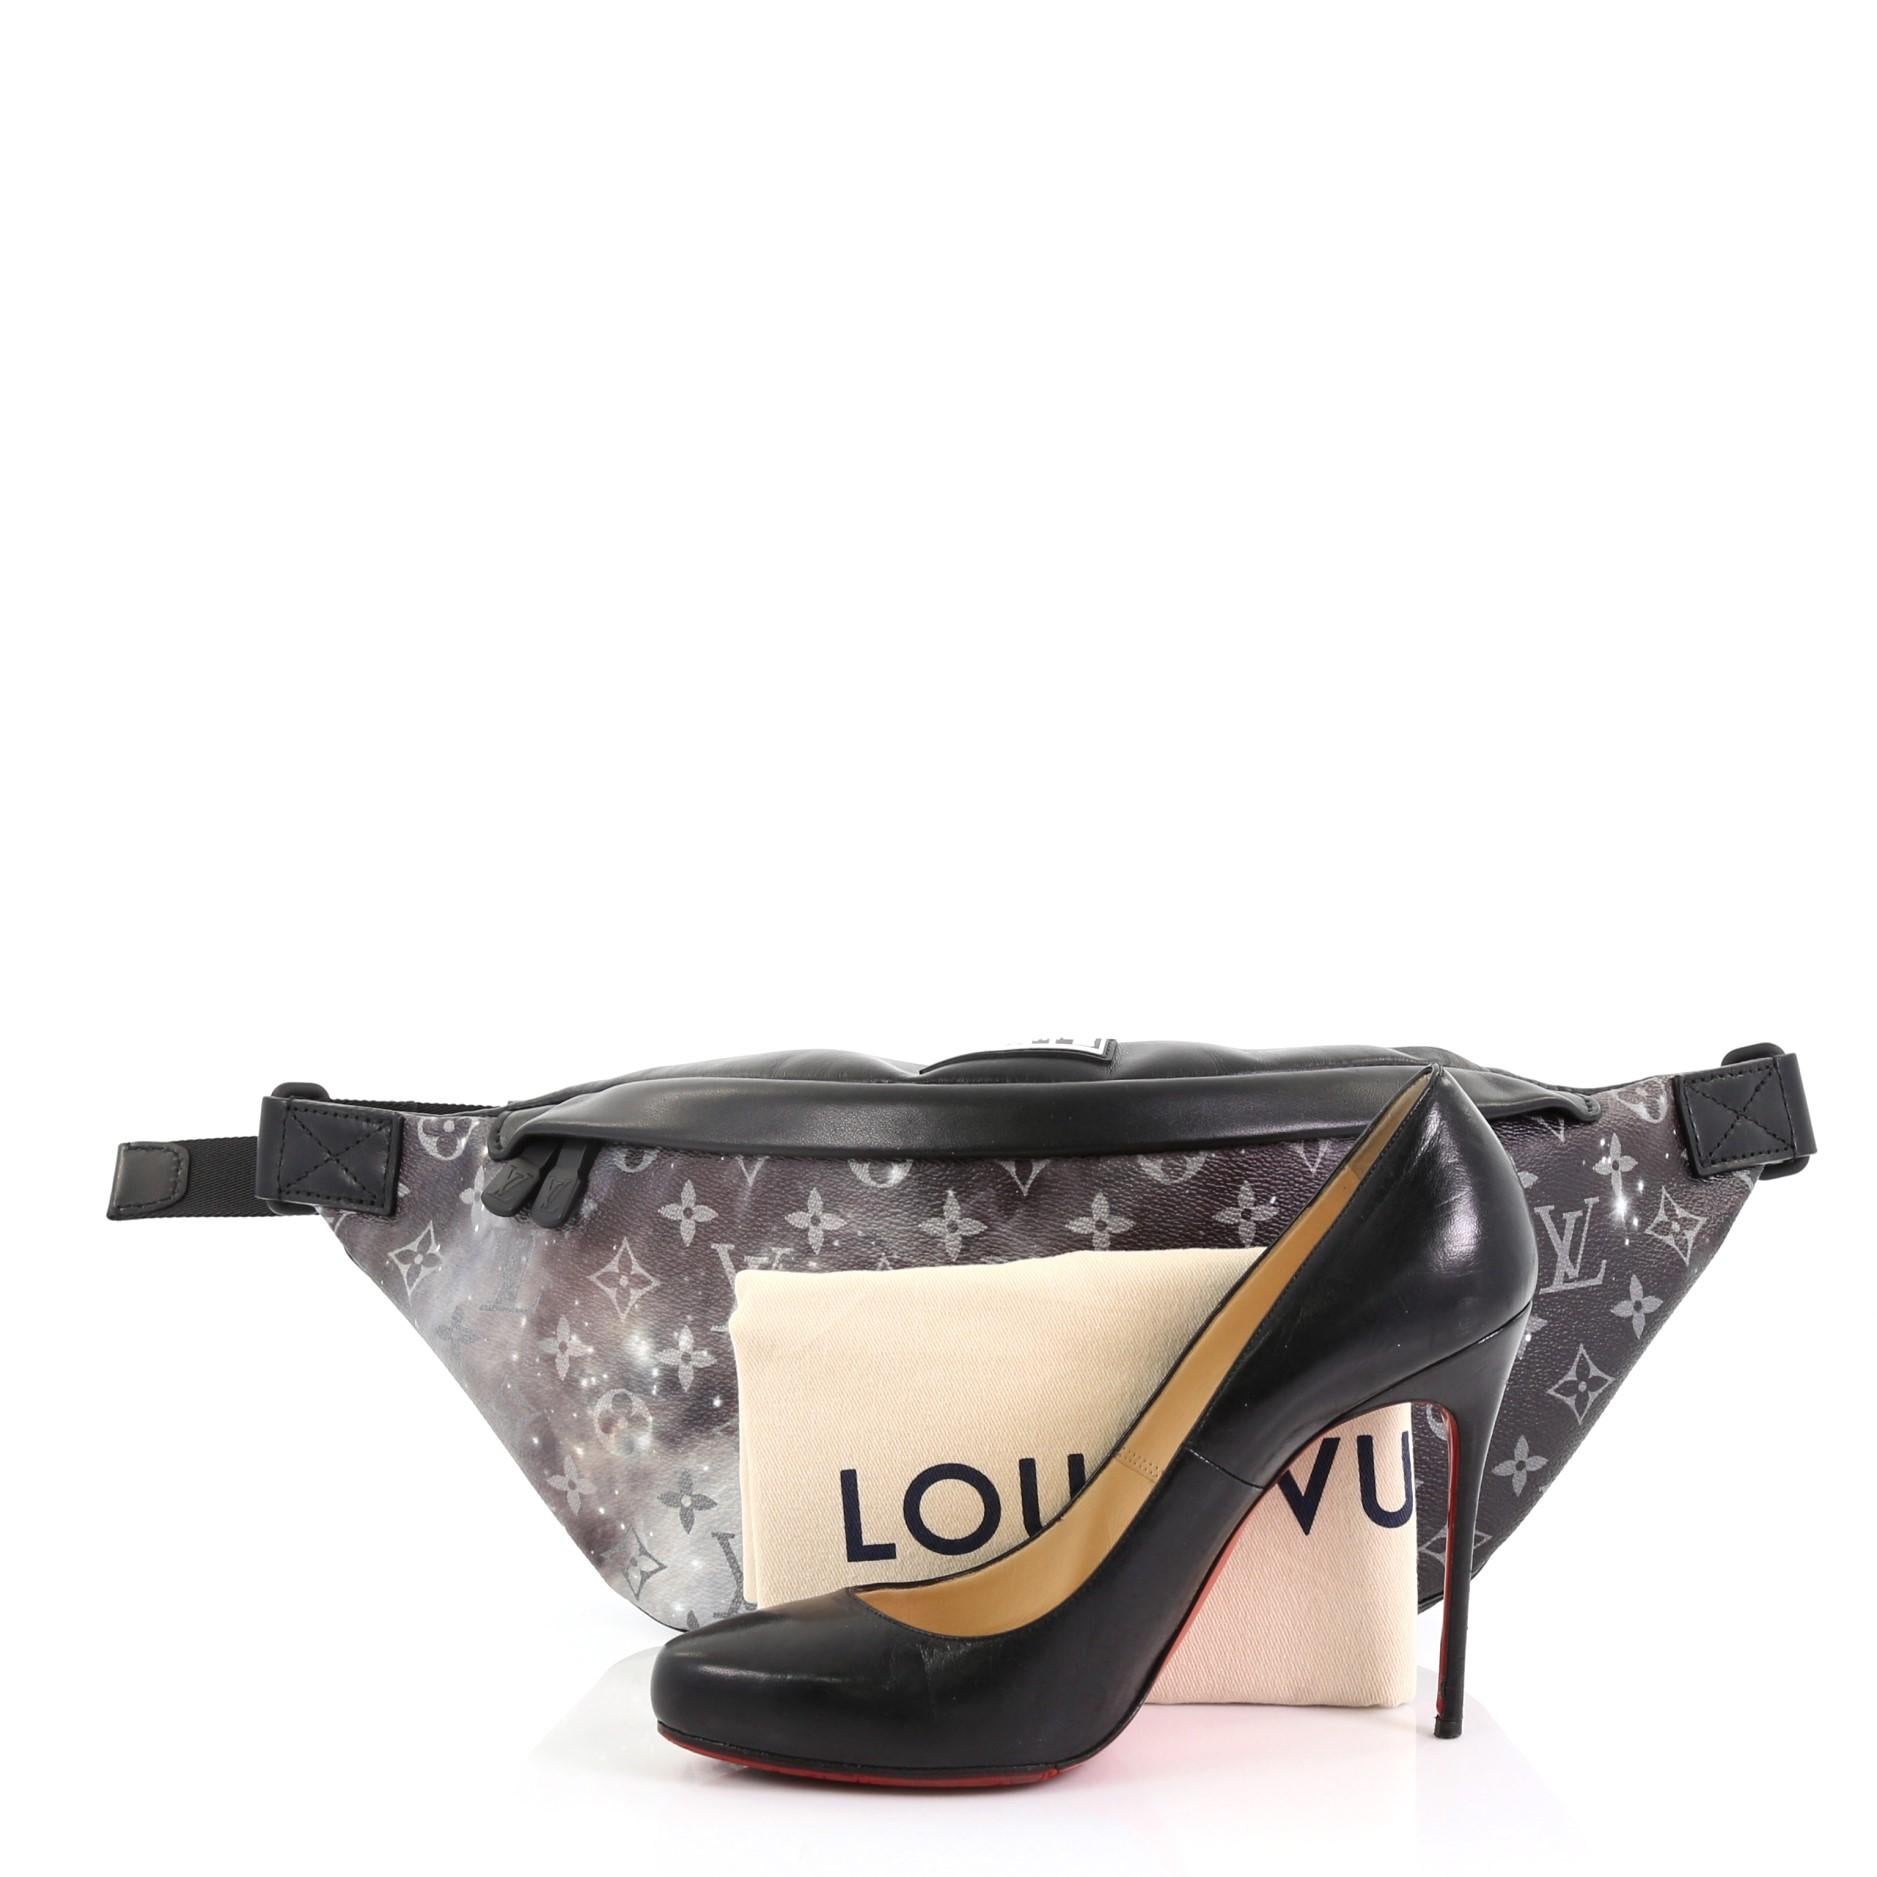 This Louis Vuitton Discovery Bumbag Limited Edition Monogram Galaxy Canvas, crafted in monogram Galaxy coated canvas, features an adjustable belt strap, exterior zipped pockets, and black gunmetal-tone hardware. Its zip closure opens to a black